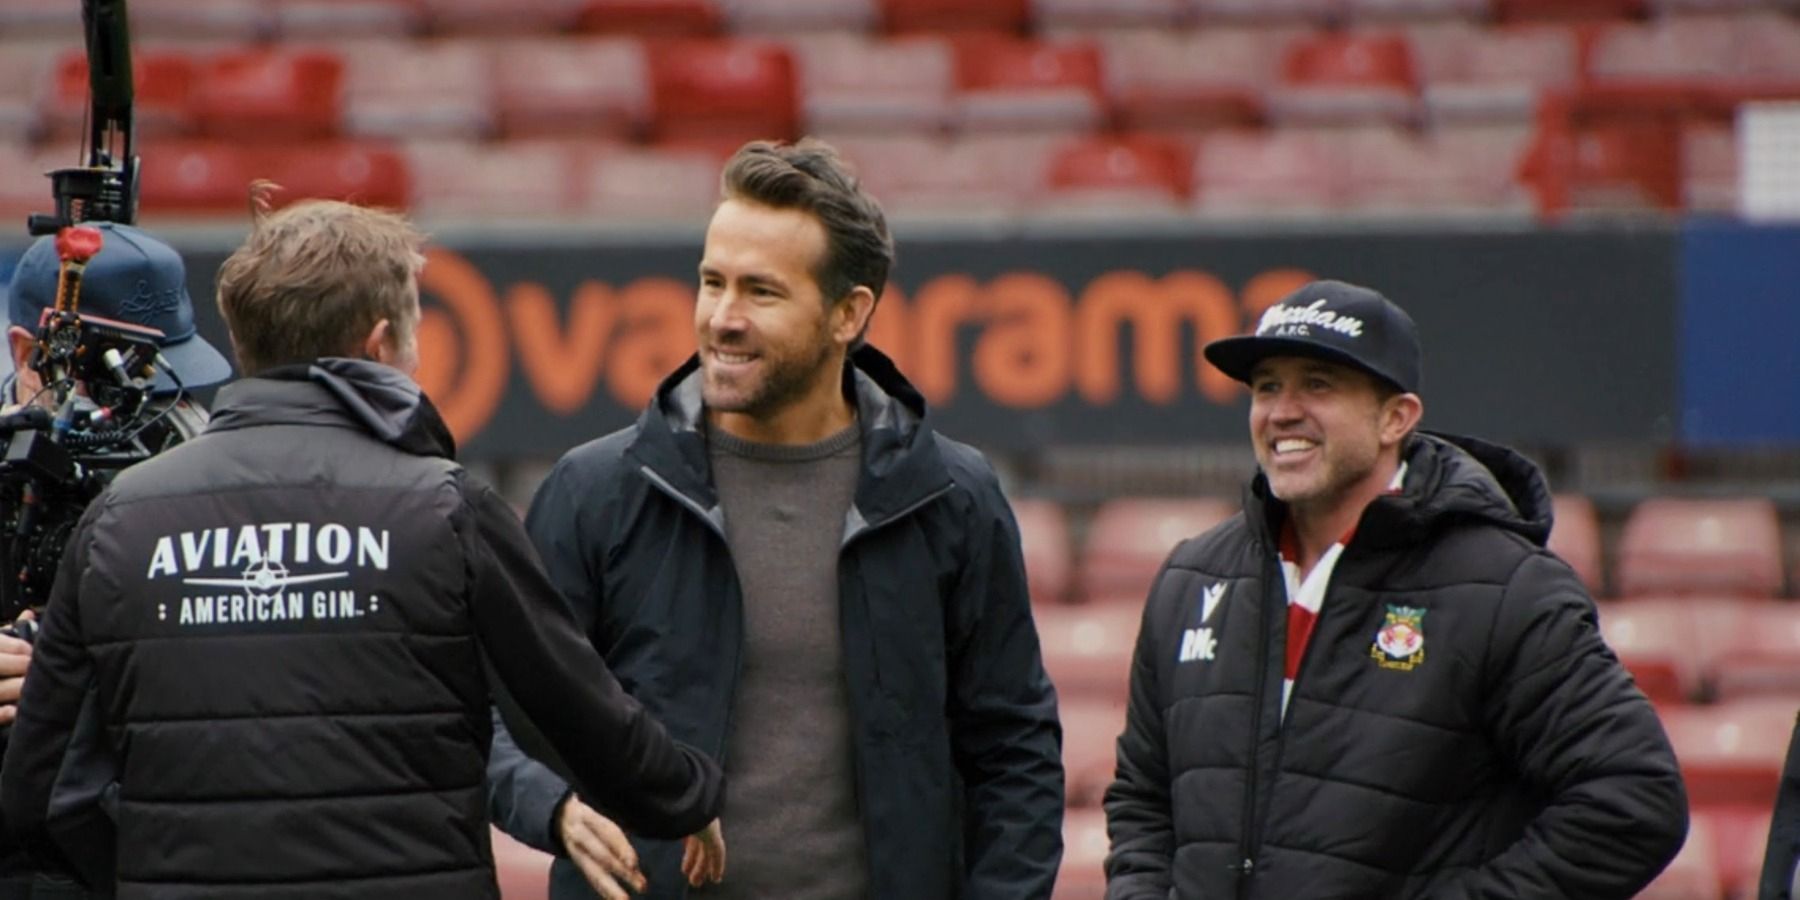 Ryan Reynolds and Rob McElhenney with Wrexham manager Phil Parkinson